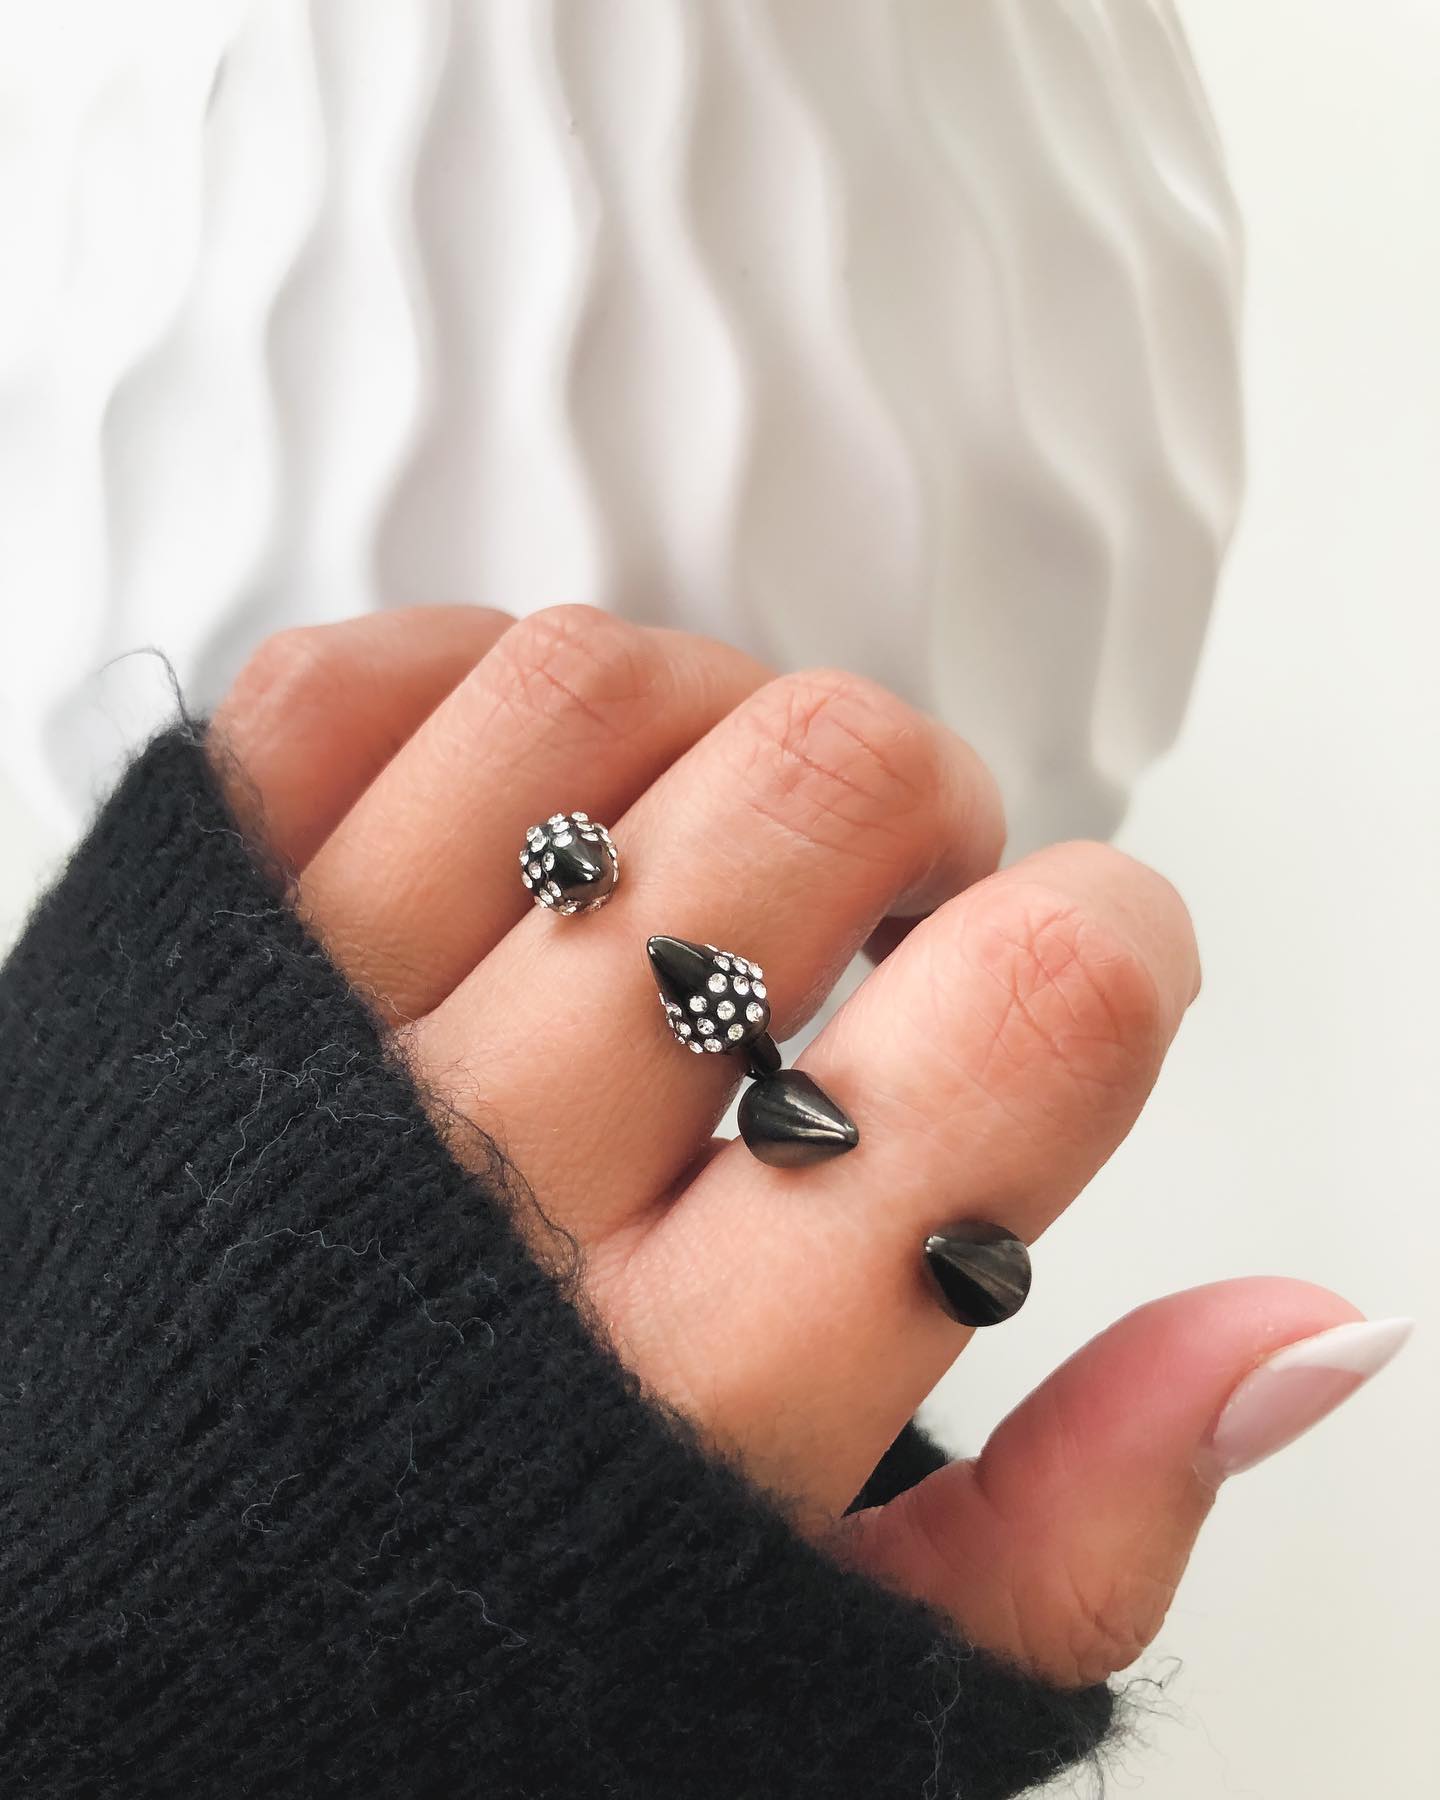 Spike Collection - Black Ring Set fine designer jewelry for men and women